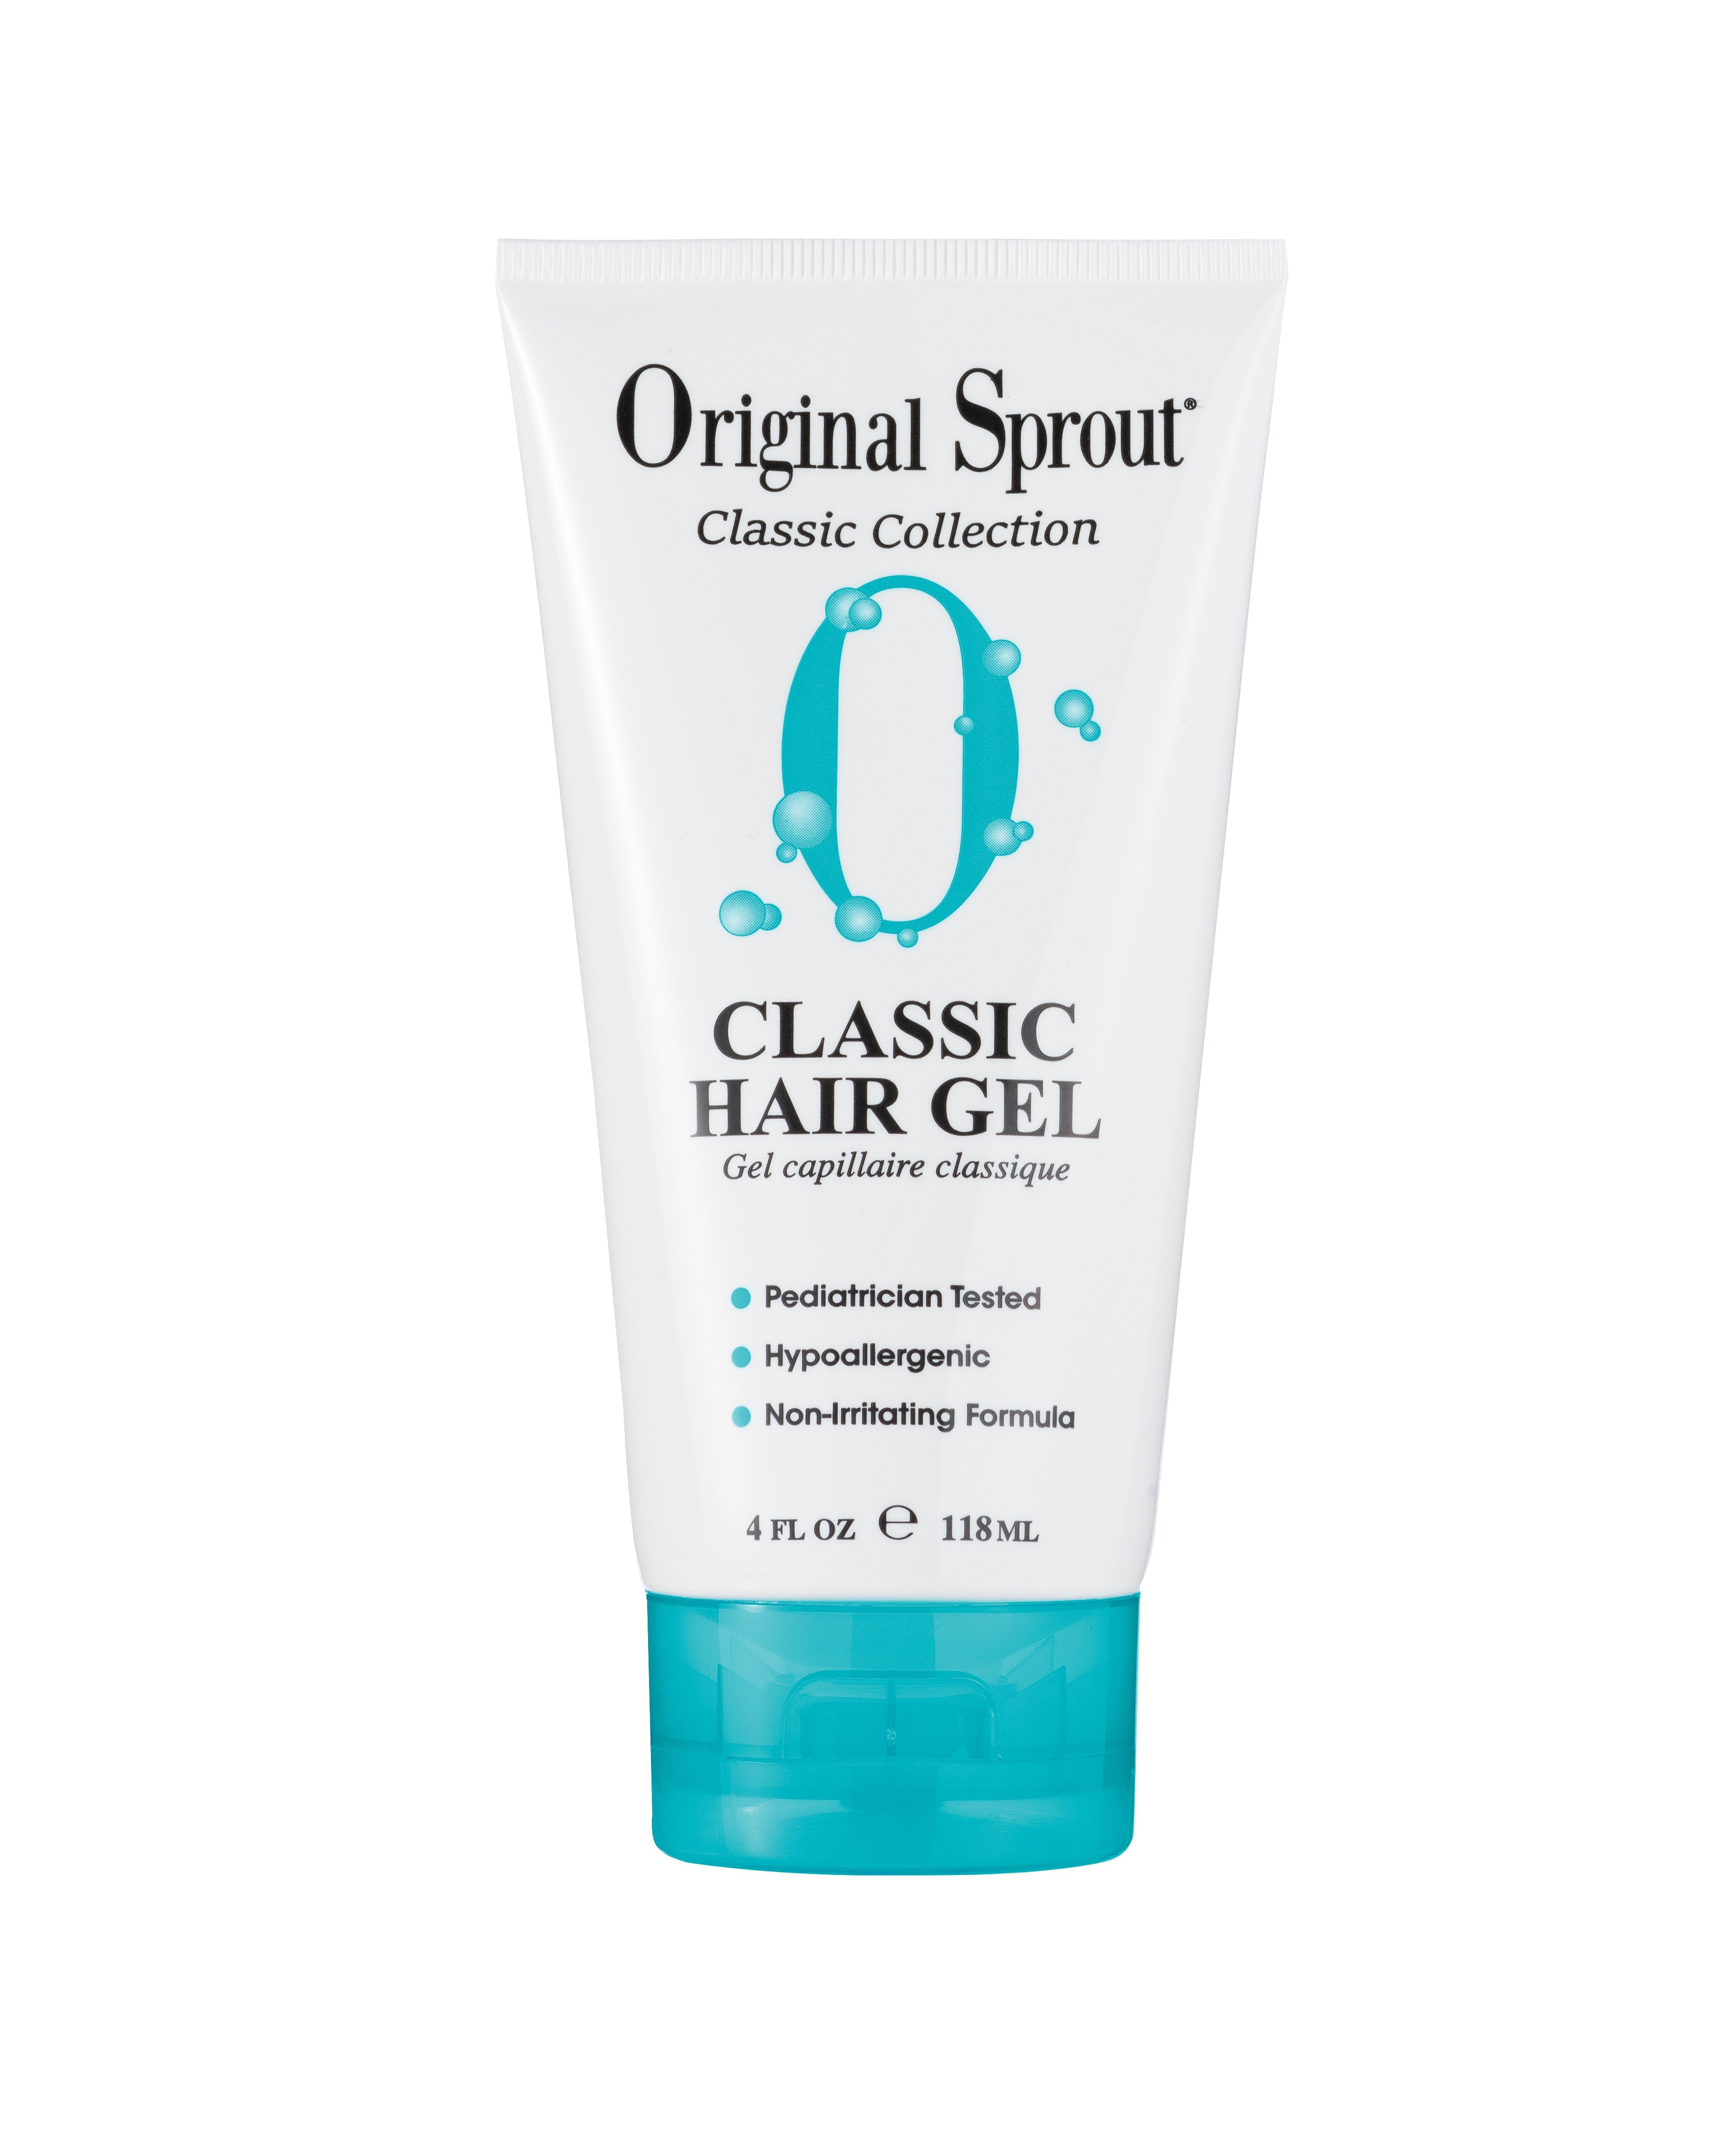 Classic Hair Gel  Original Sprout Malaysia